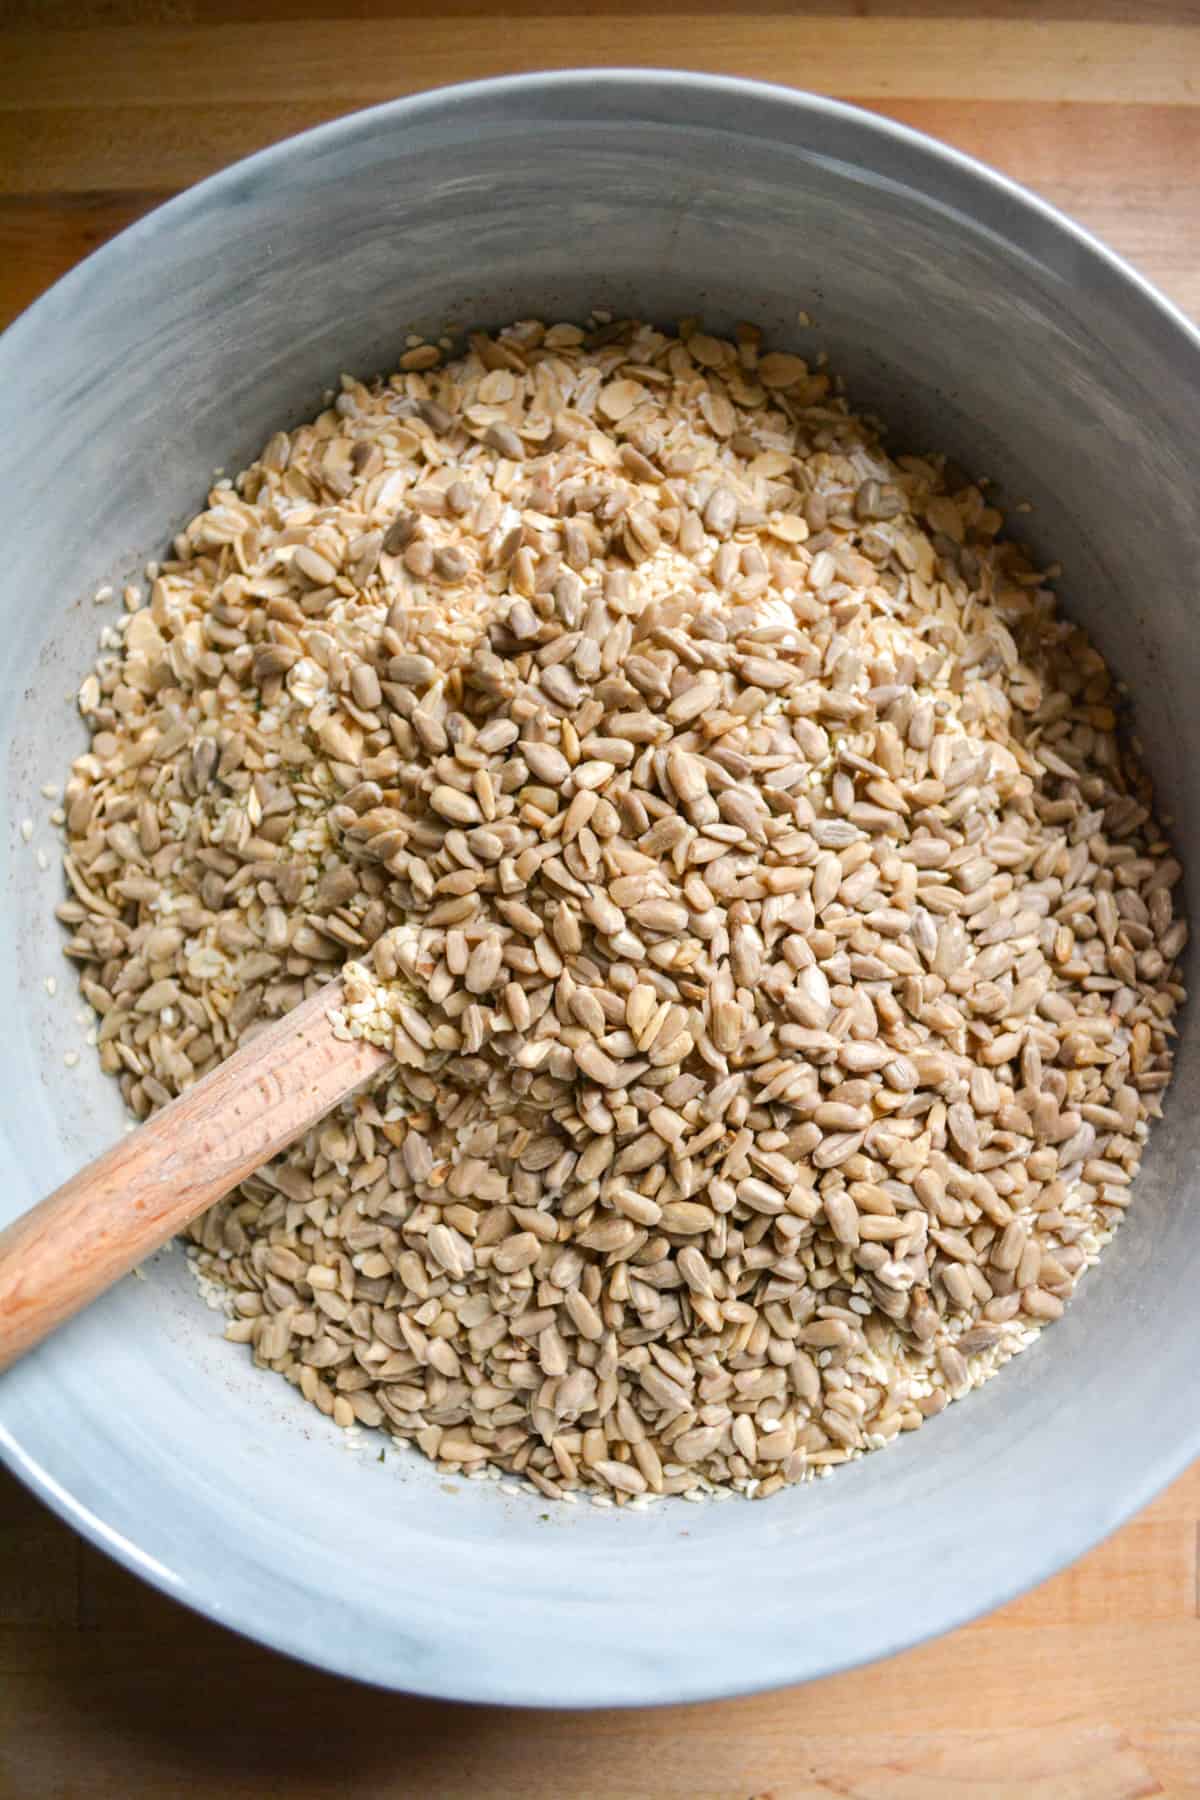 Rolled oats and seeds added into the mixing bowl with a spatula in it.